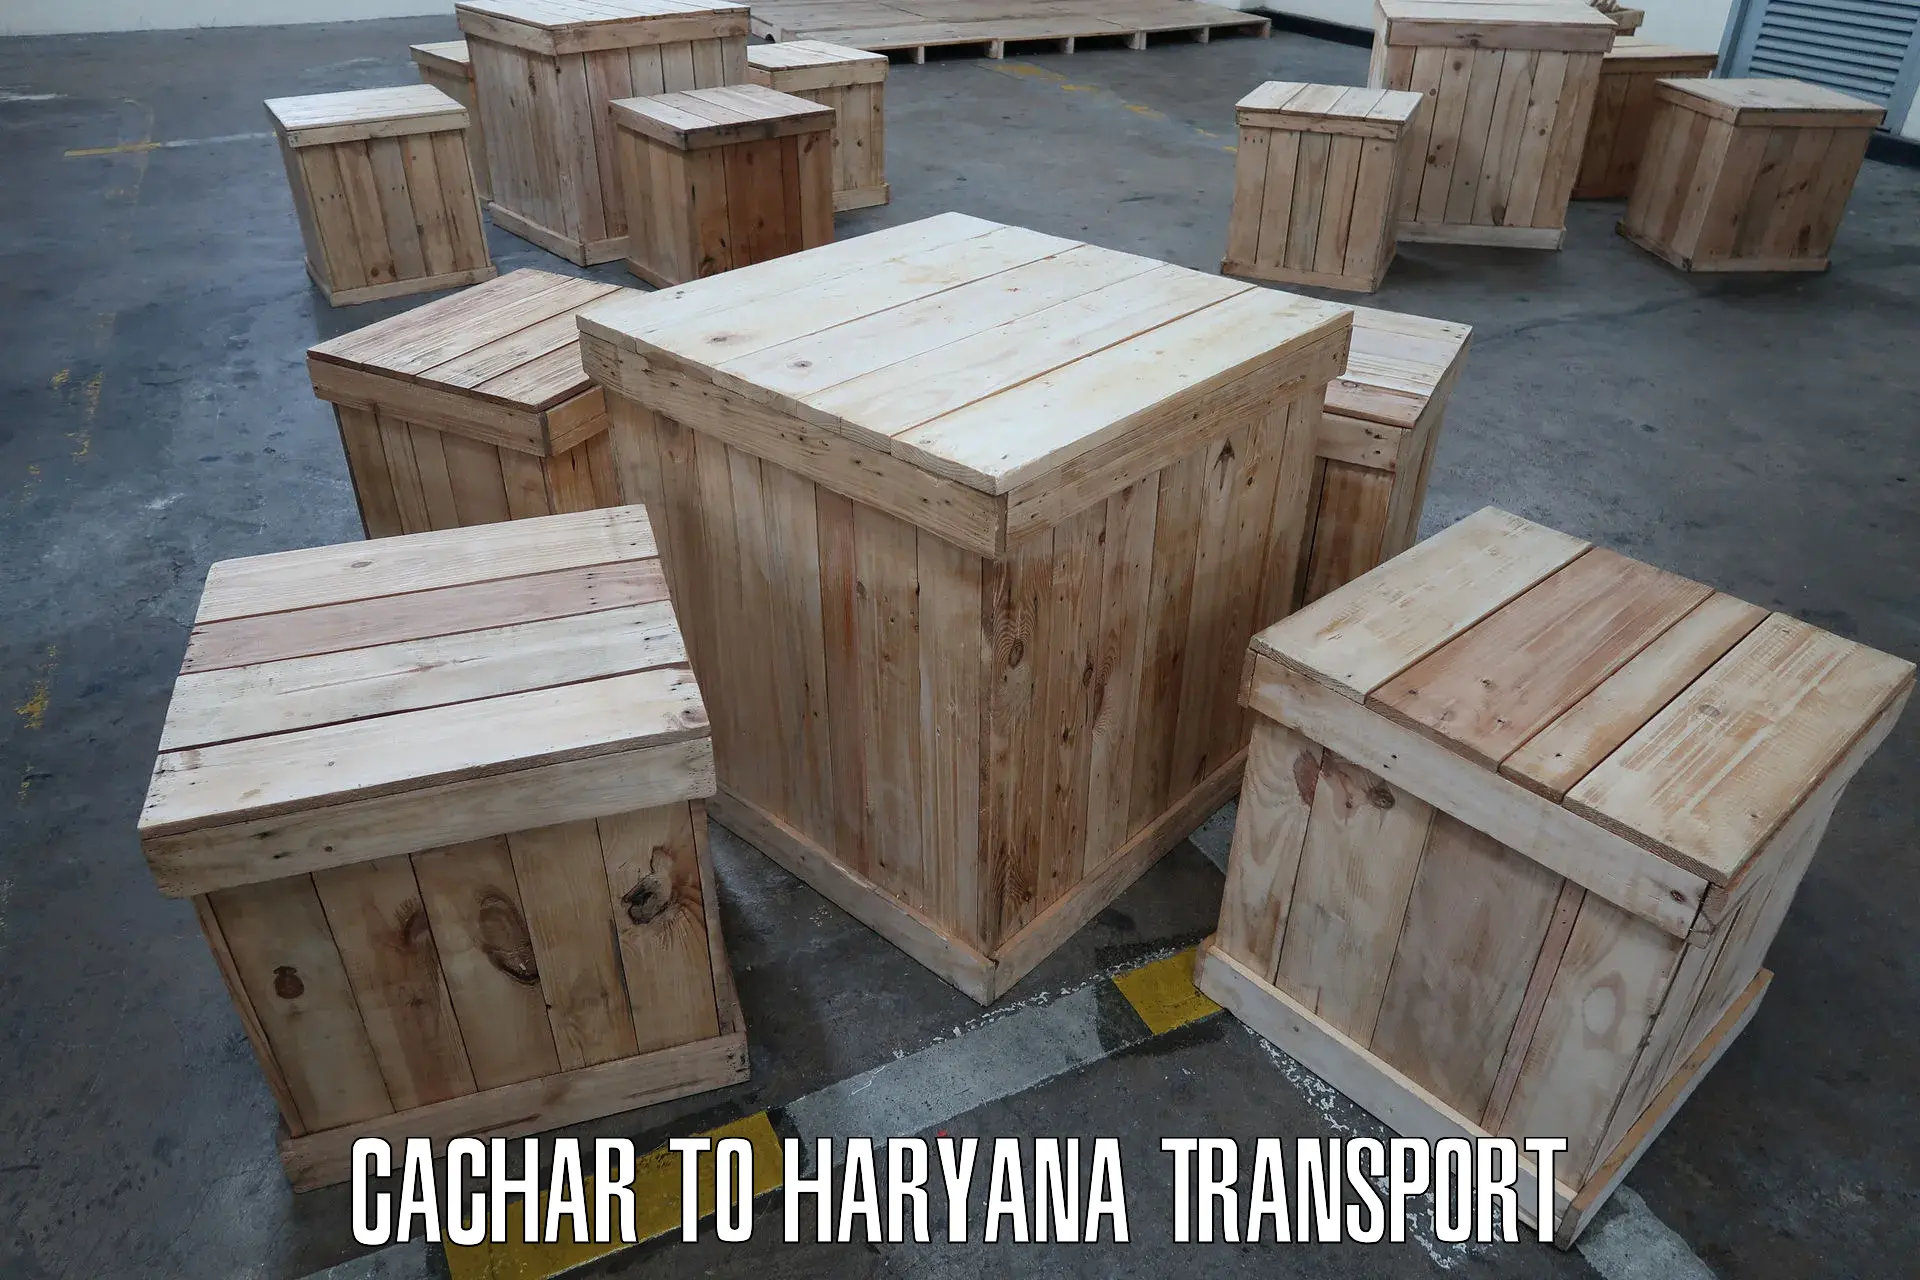 Air freight transport services Cachar to Loharu